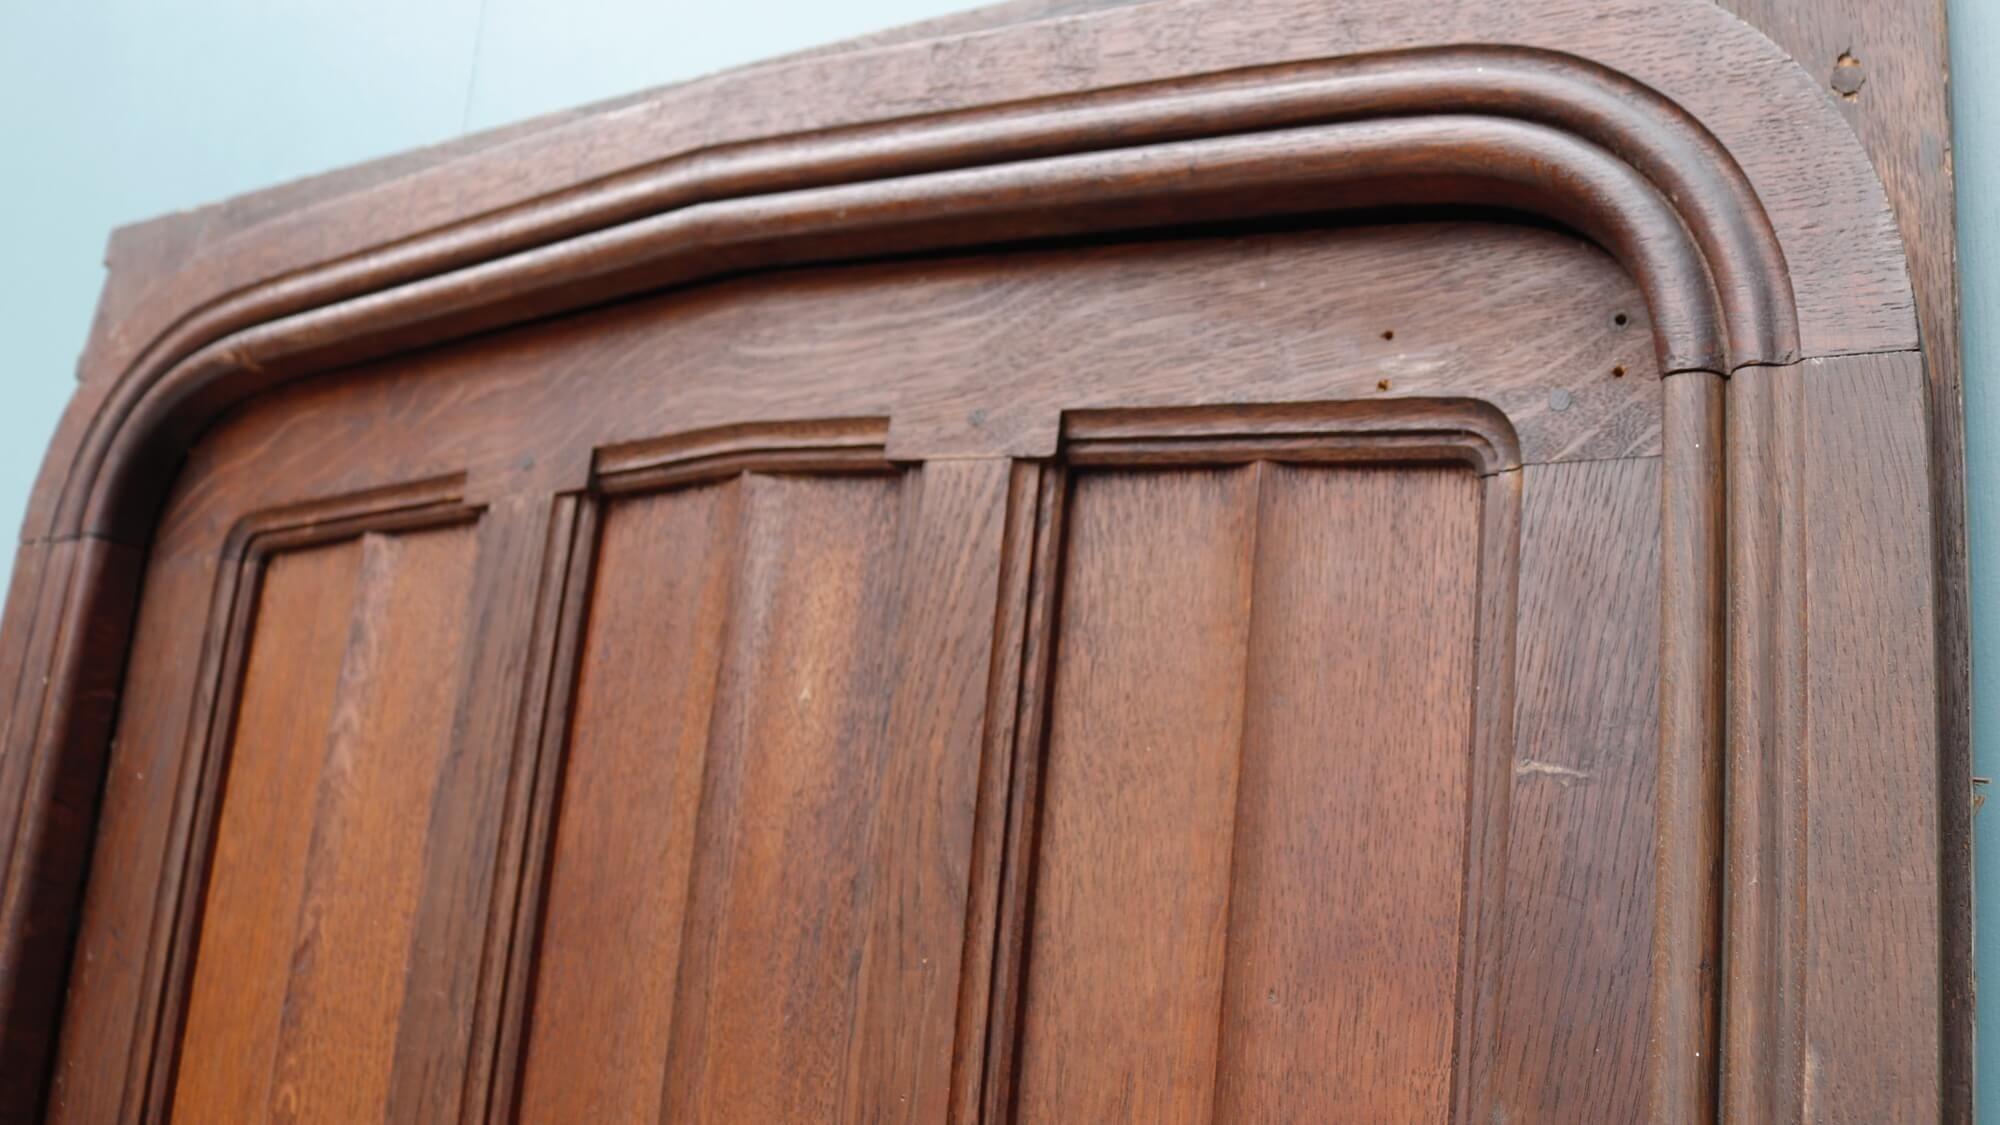 Antique Edwardian Oak Door with Frame In Fair Condition For Sale In Wormelow, Herefordshire